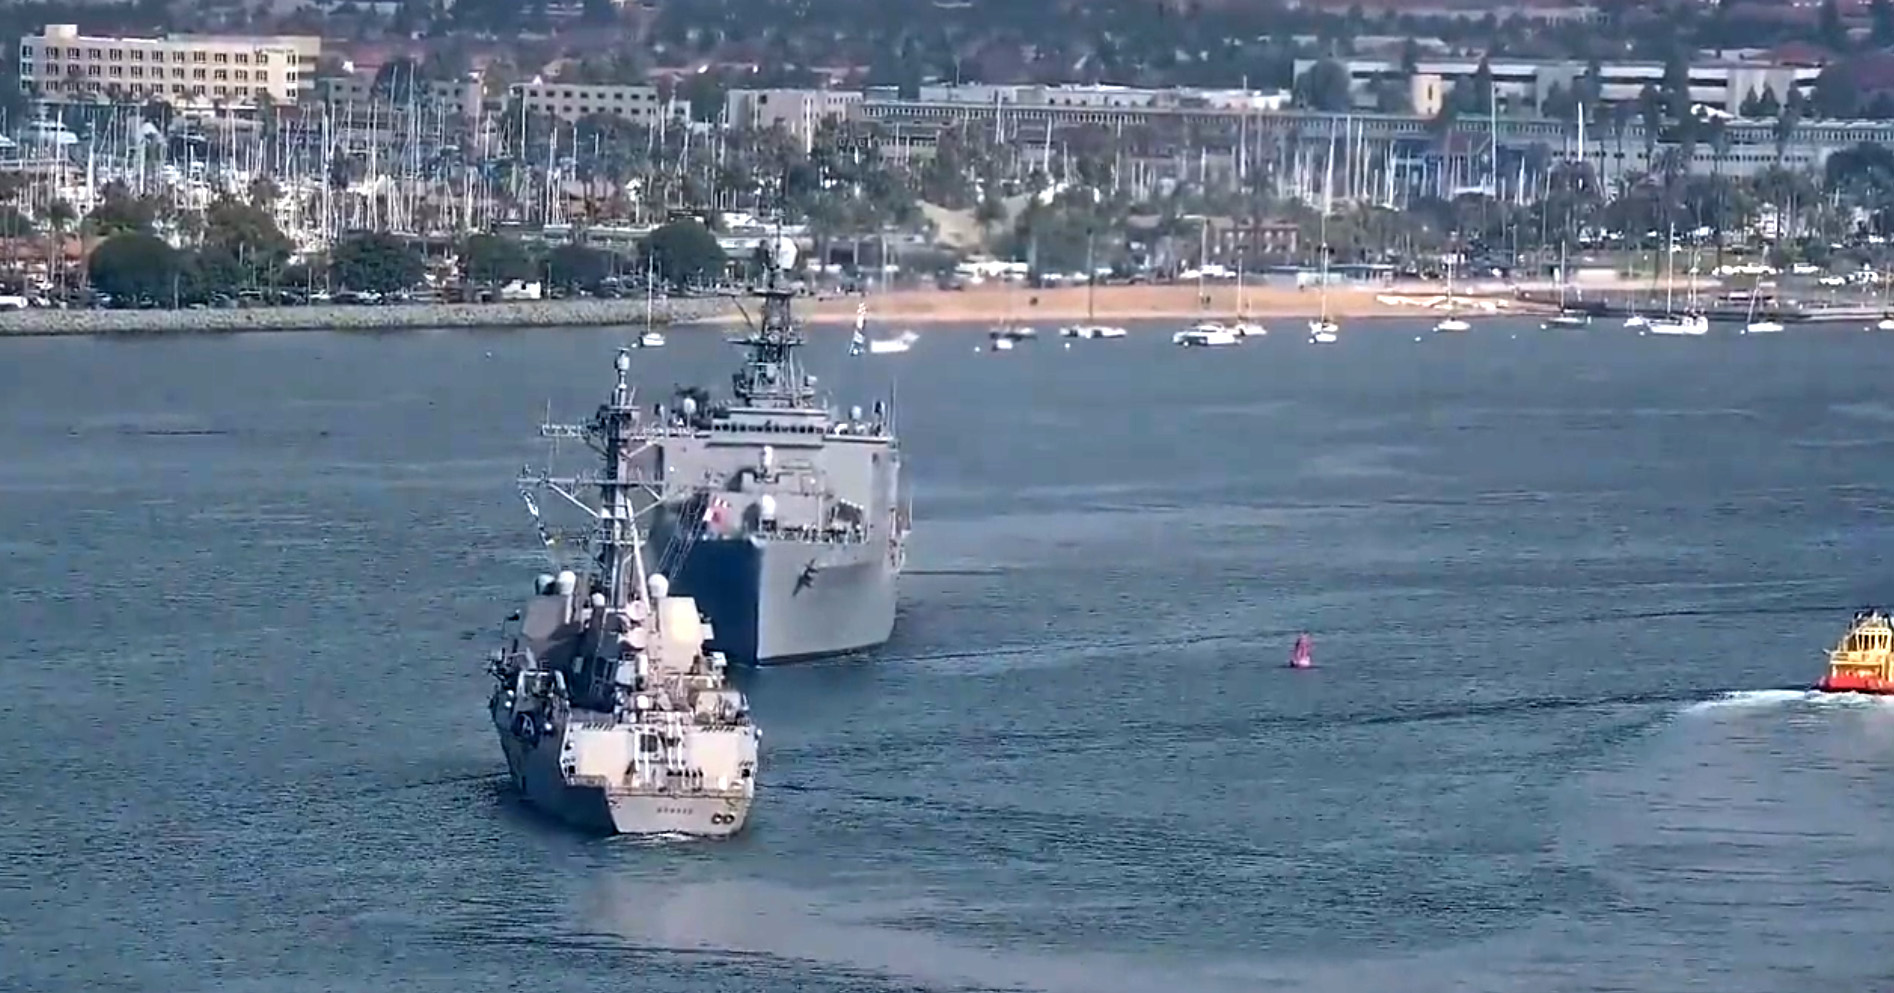 PHOTO: In this screen grab from a video, two U.S. Navy warships perform evasive maneuvers during a near miss in San Diego Bay on Nov. 29, 2022.